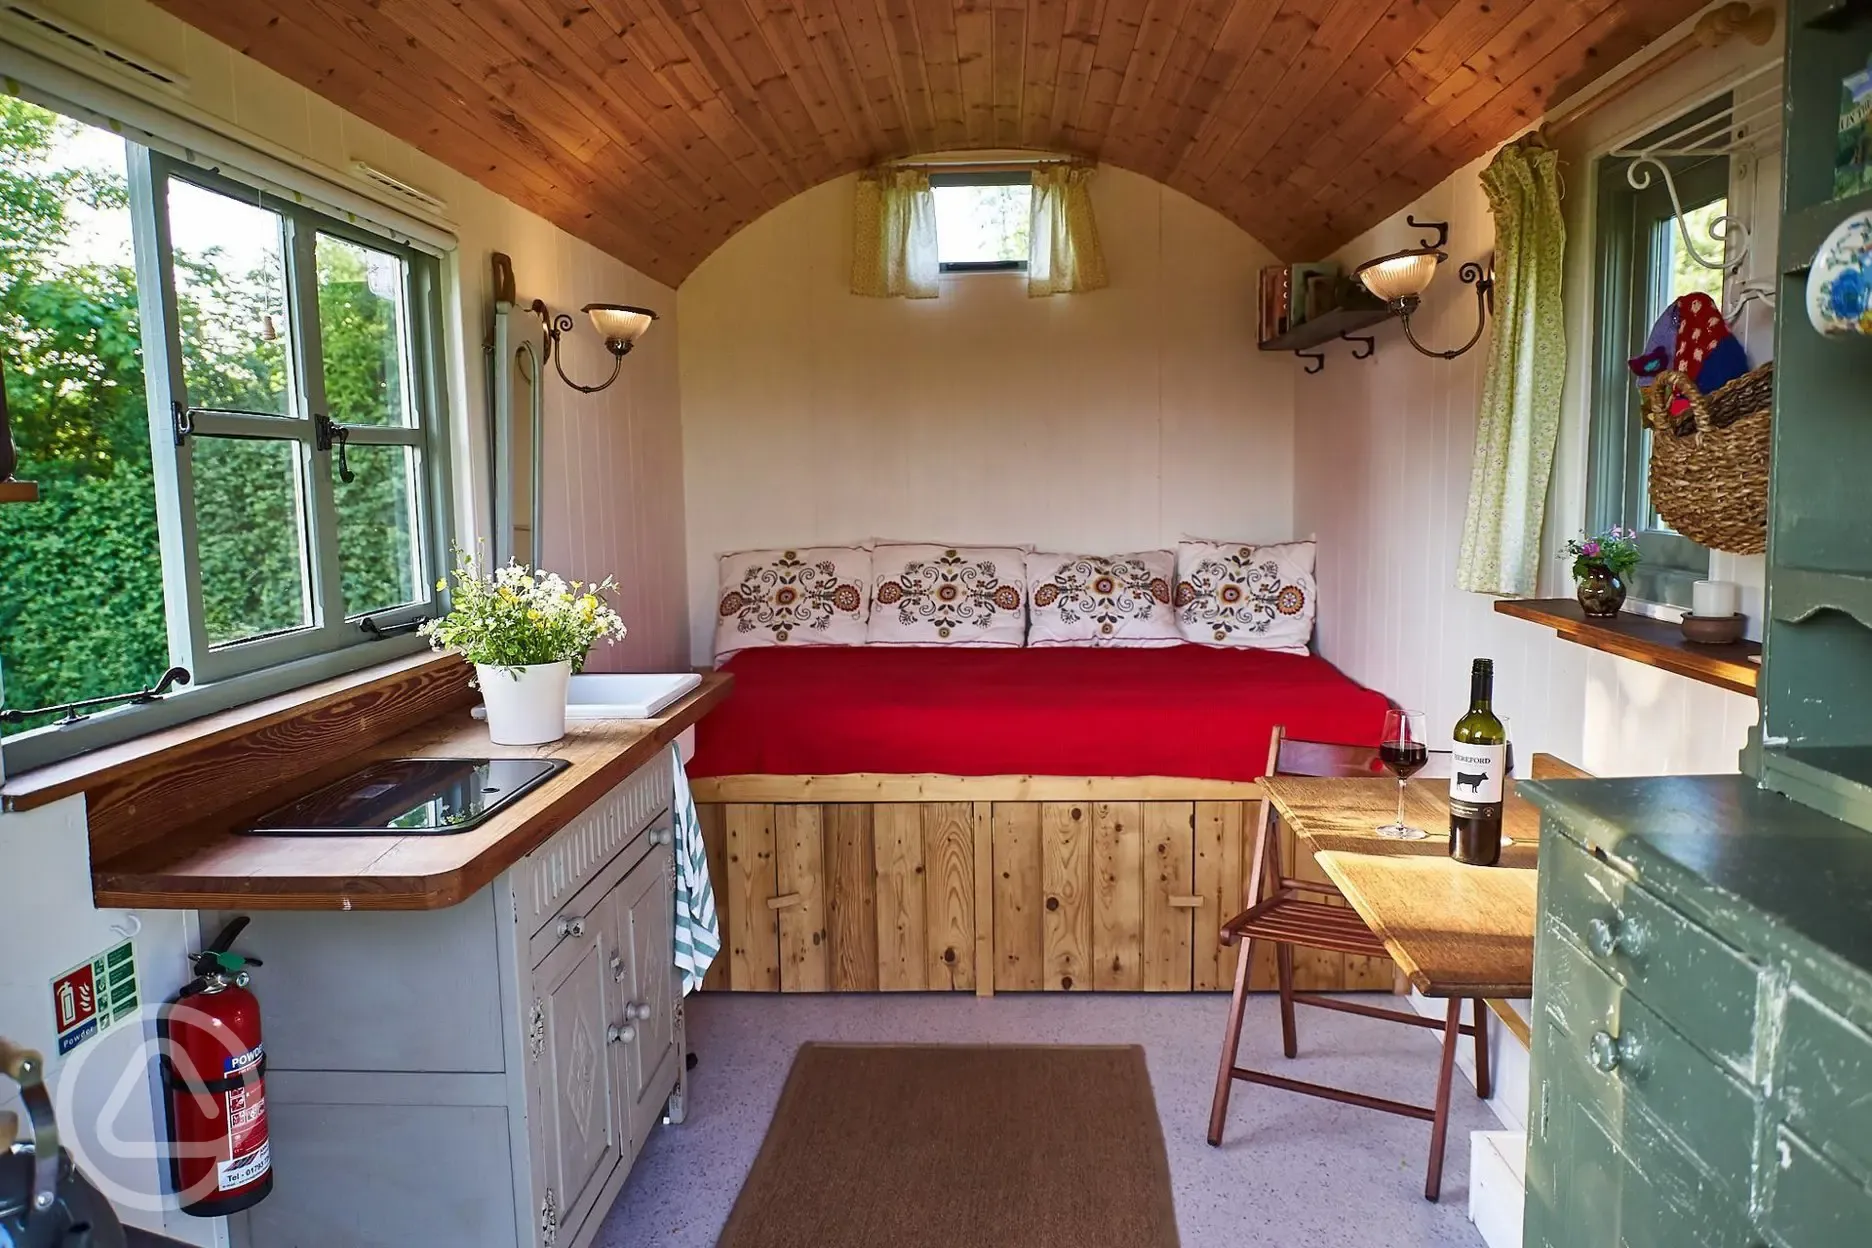 Hut interior and bed